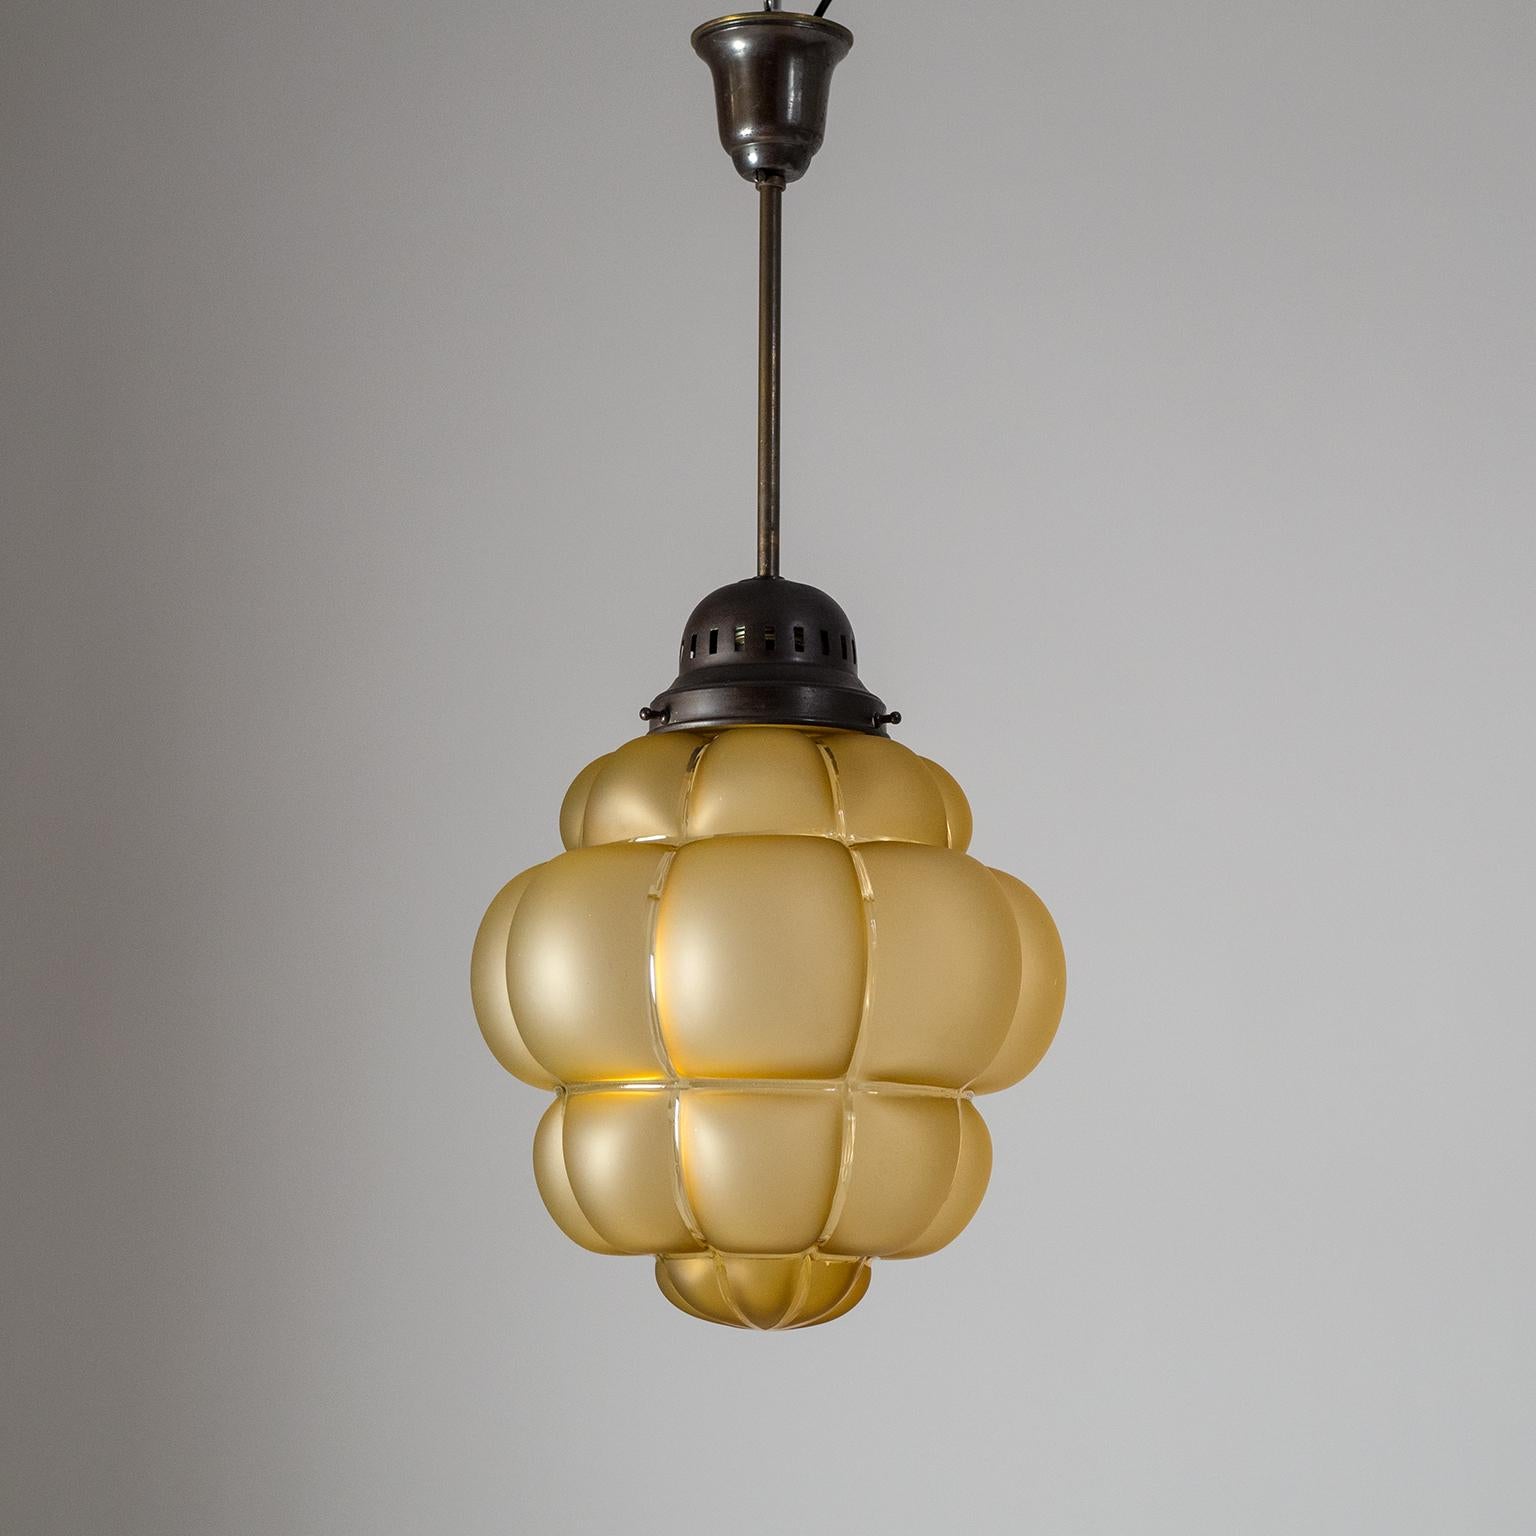 Very unique Art Deco pendant from the 1920s. A rare 'bubble' shaped amber glass diffuser satinated with clear stripes is suspended by dark patinated brass hardware. Very nice original condition. One original brass and ceramic E27 socket with new